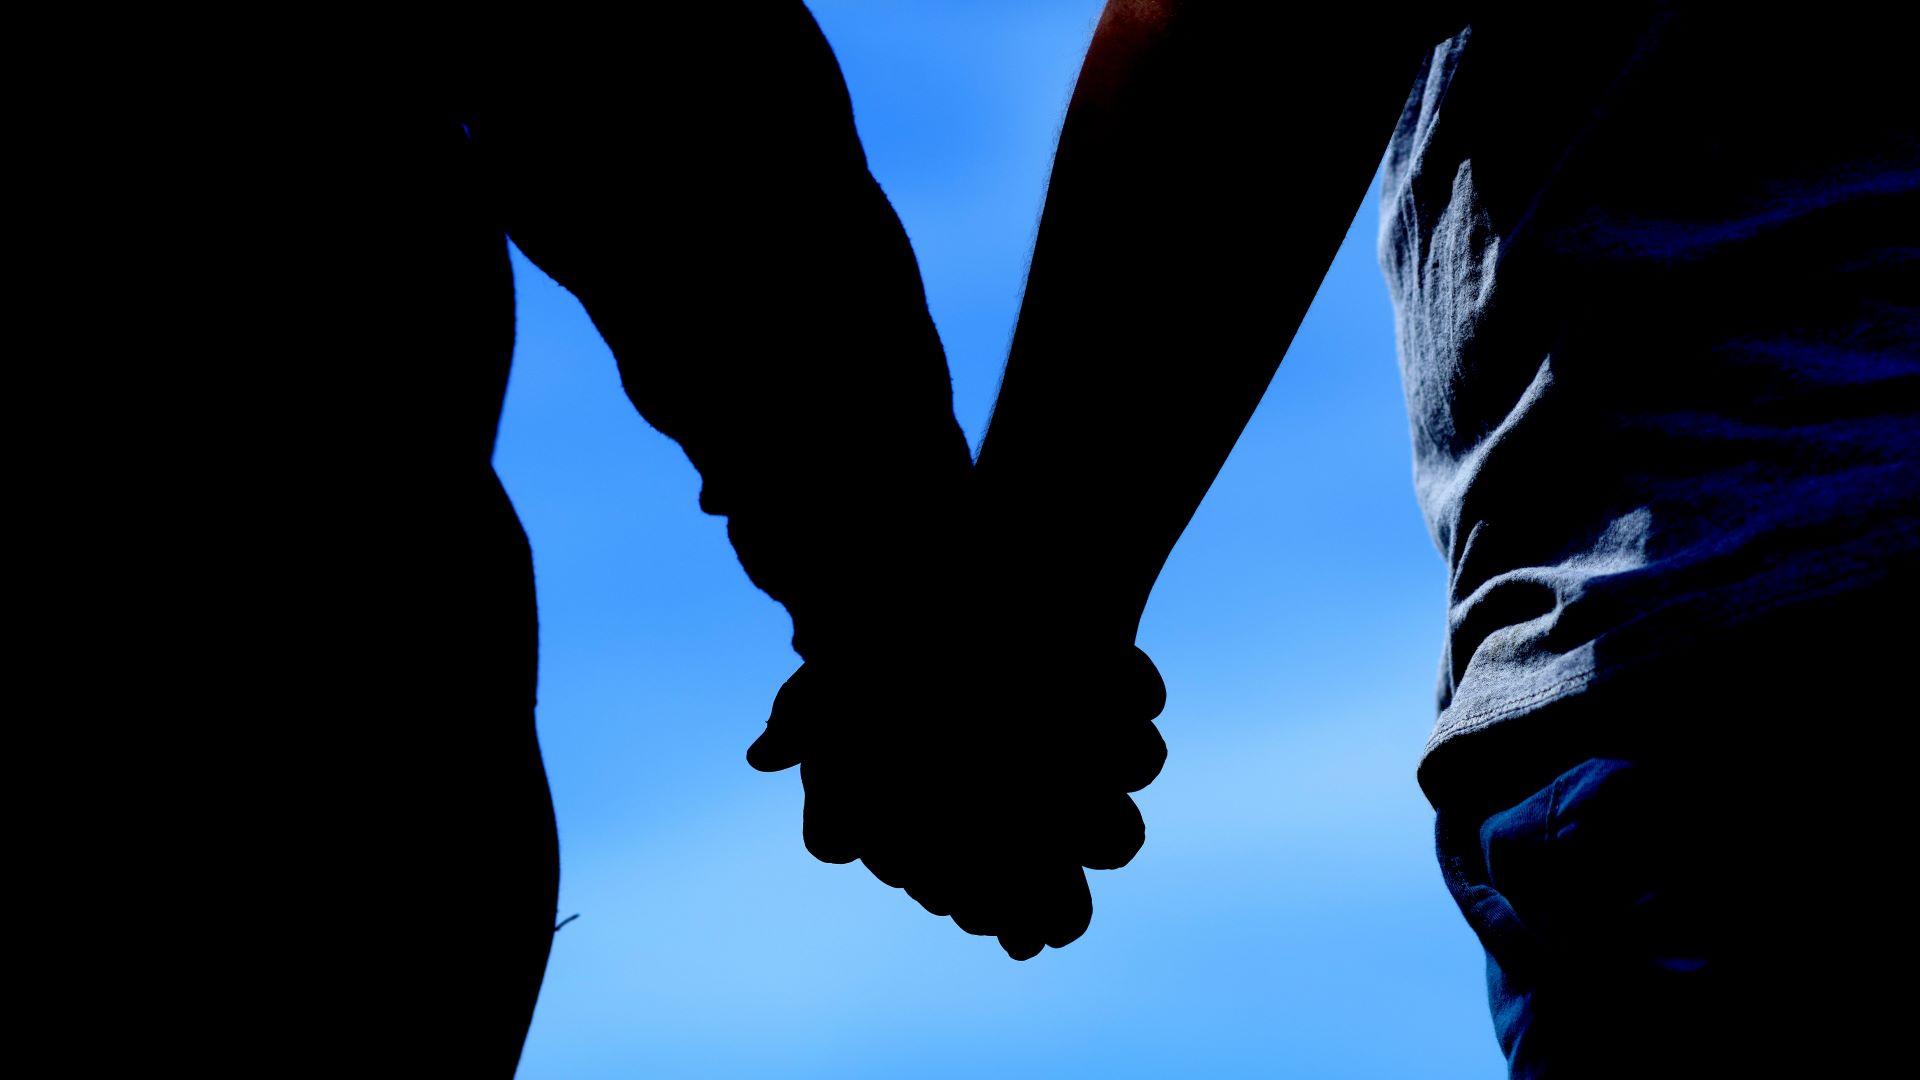 A silhouette image of two individuals holding hands